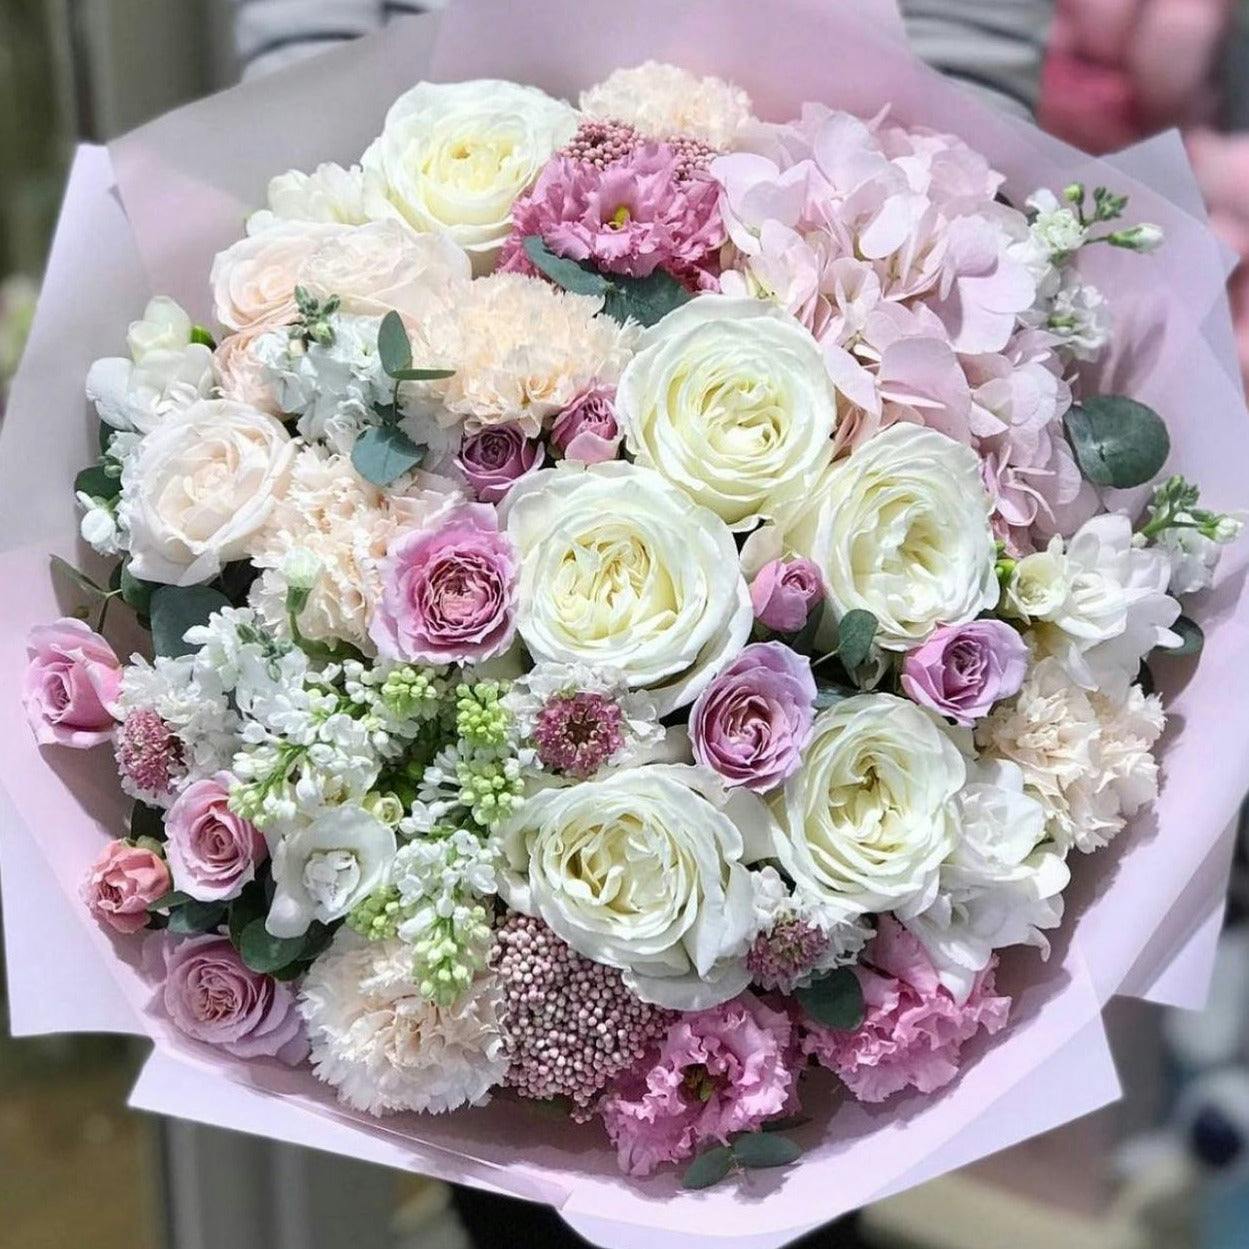 Bouquet "Make her Smile"